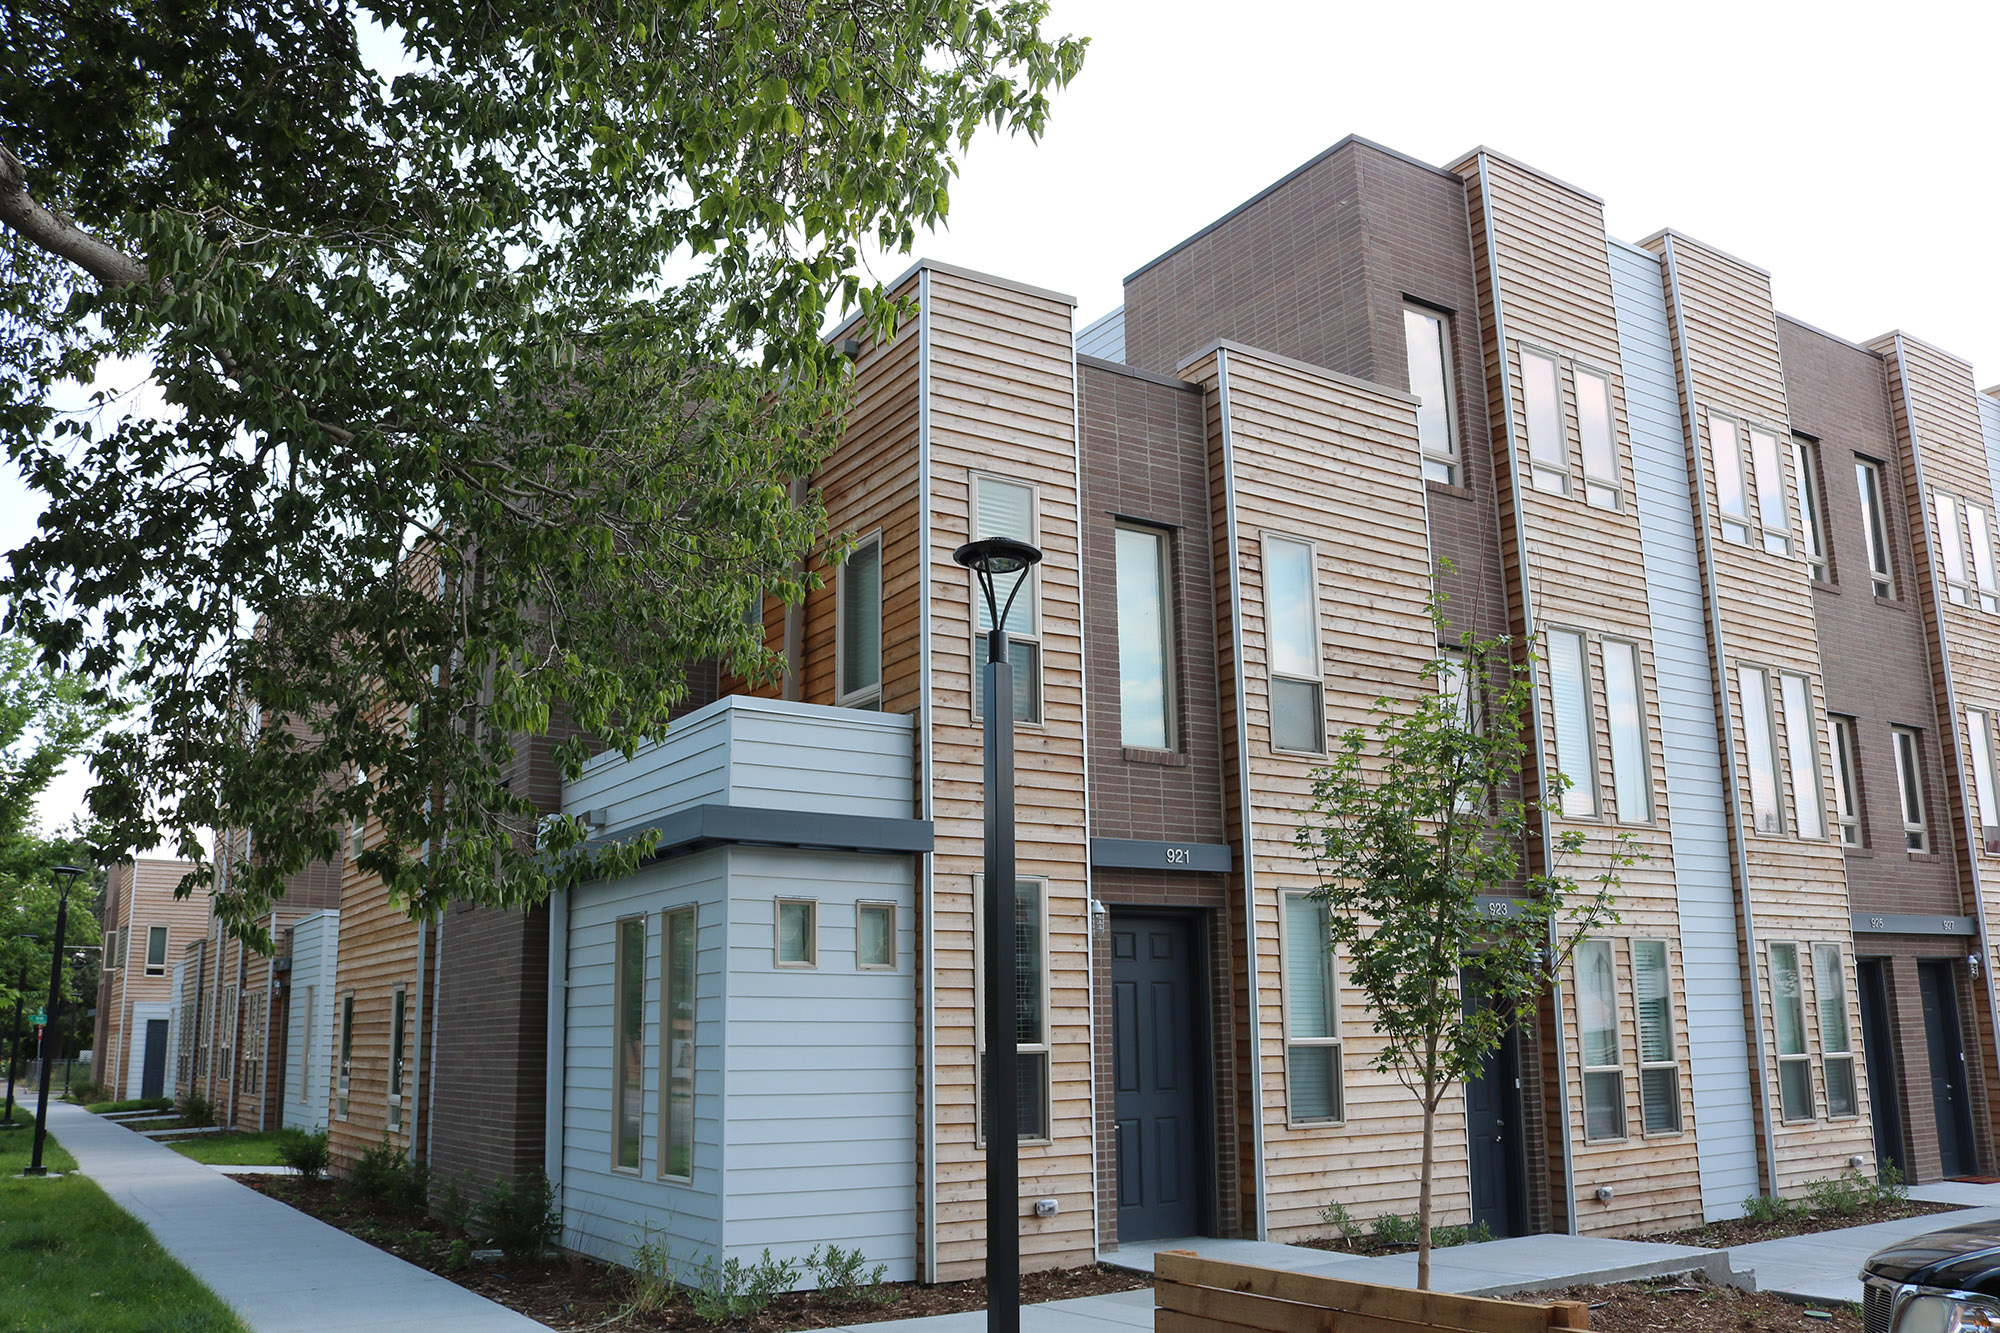 corner exterior view of mariposa townhome building